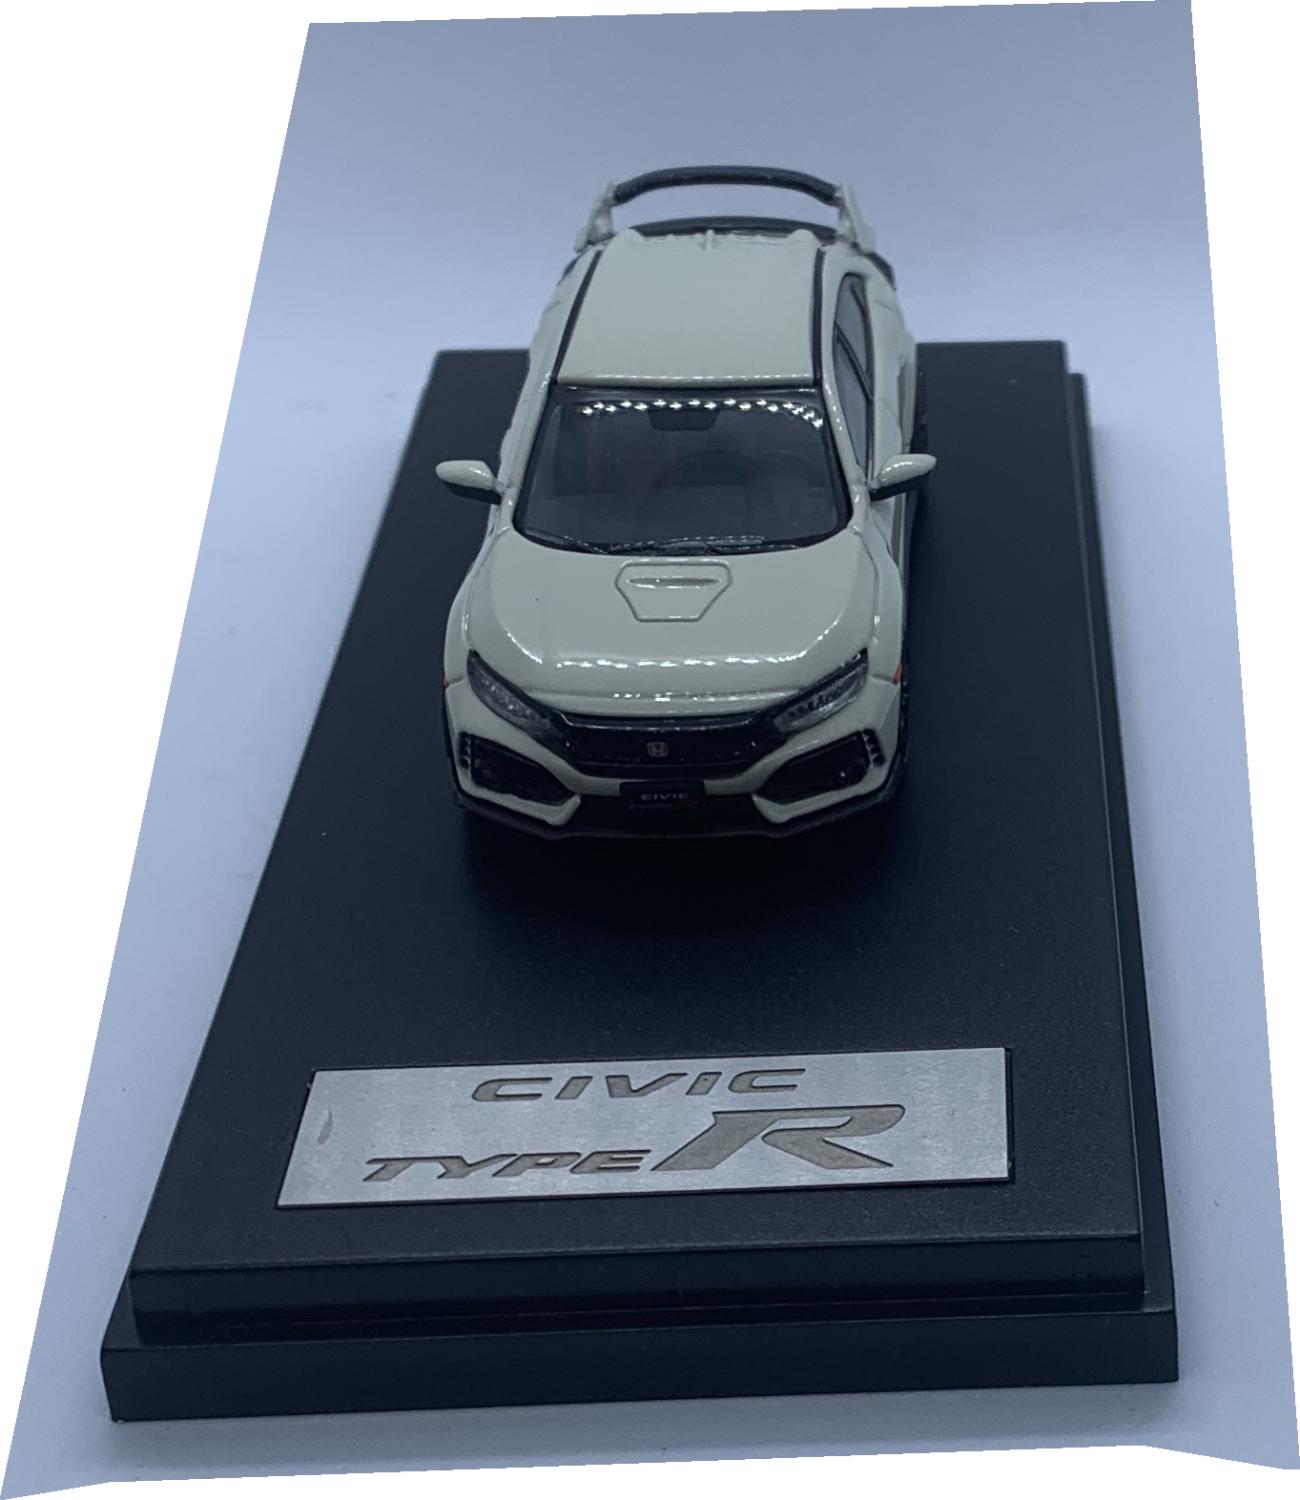 good reproduction of the Honda Civic Type R mounted on a removable plinth and a removable hard plastic cover